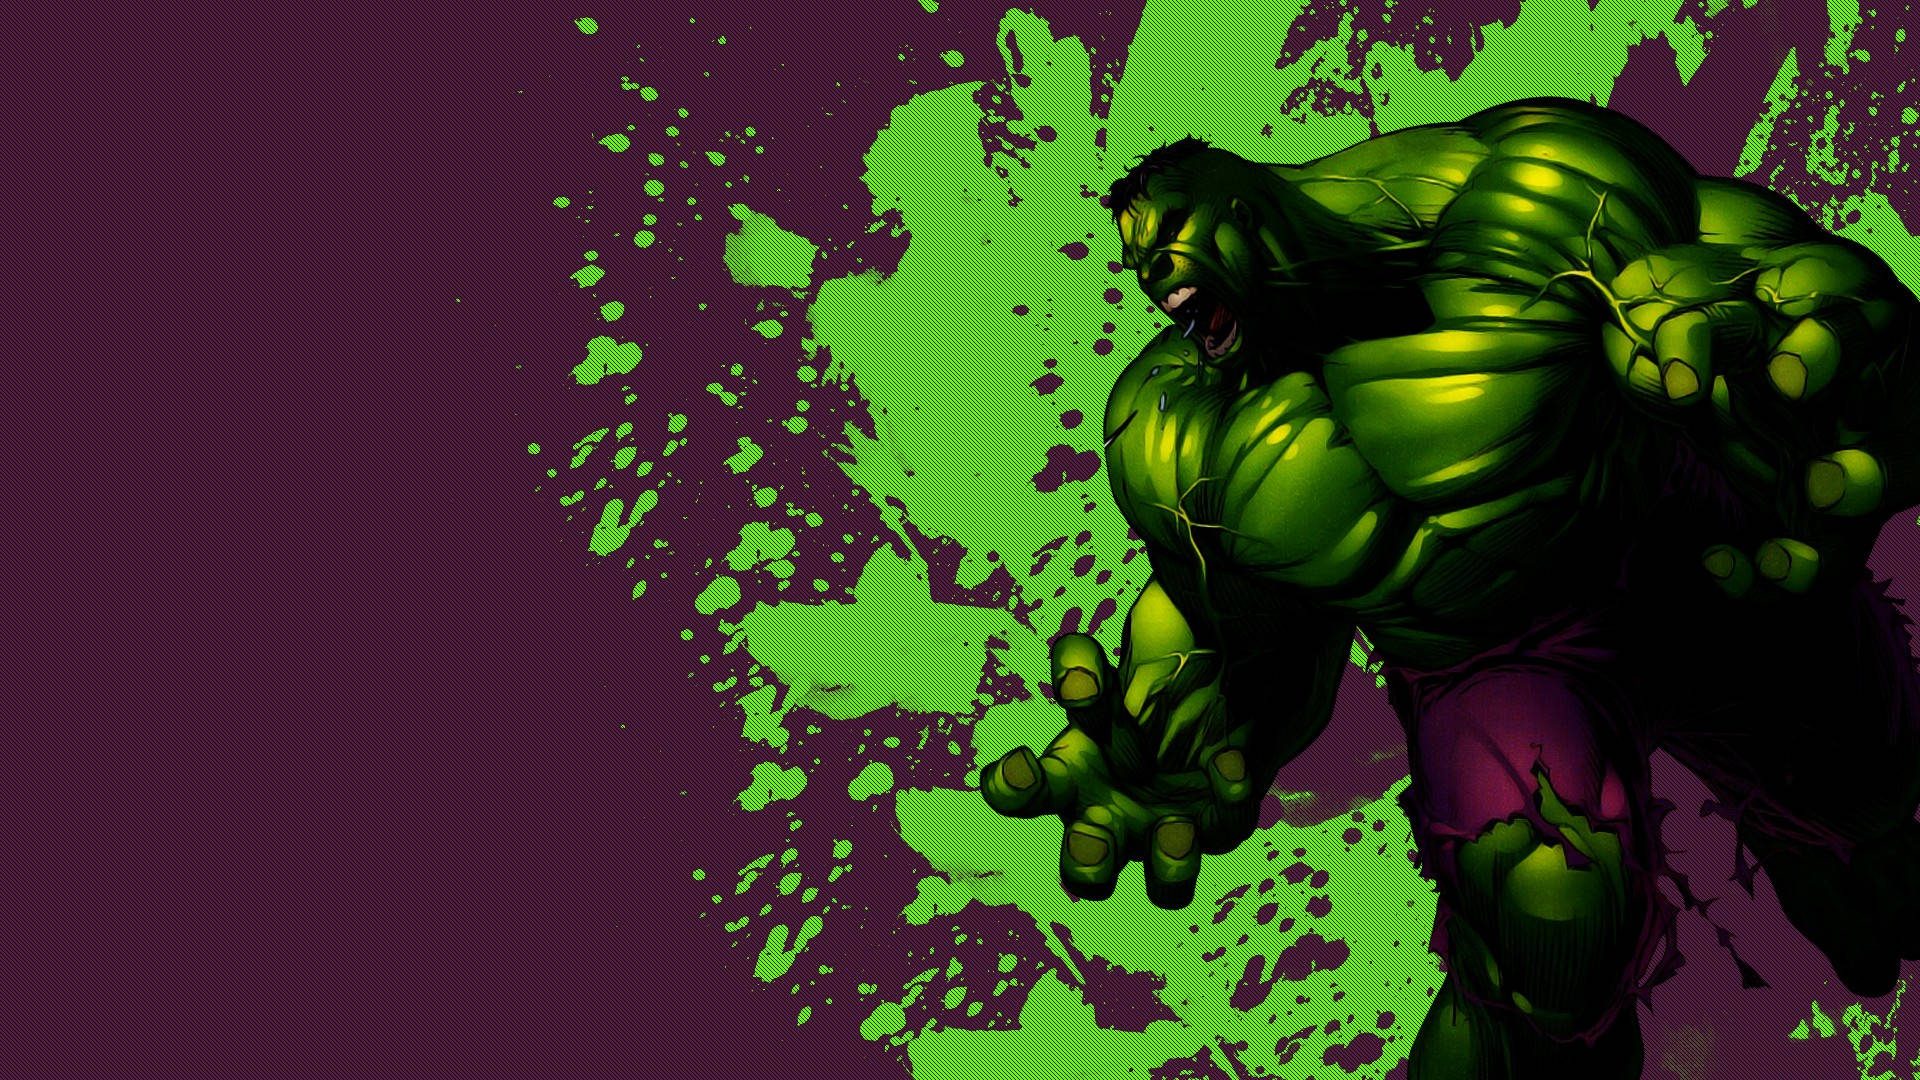 Incredible Hulk With Green Splatters Background